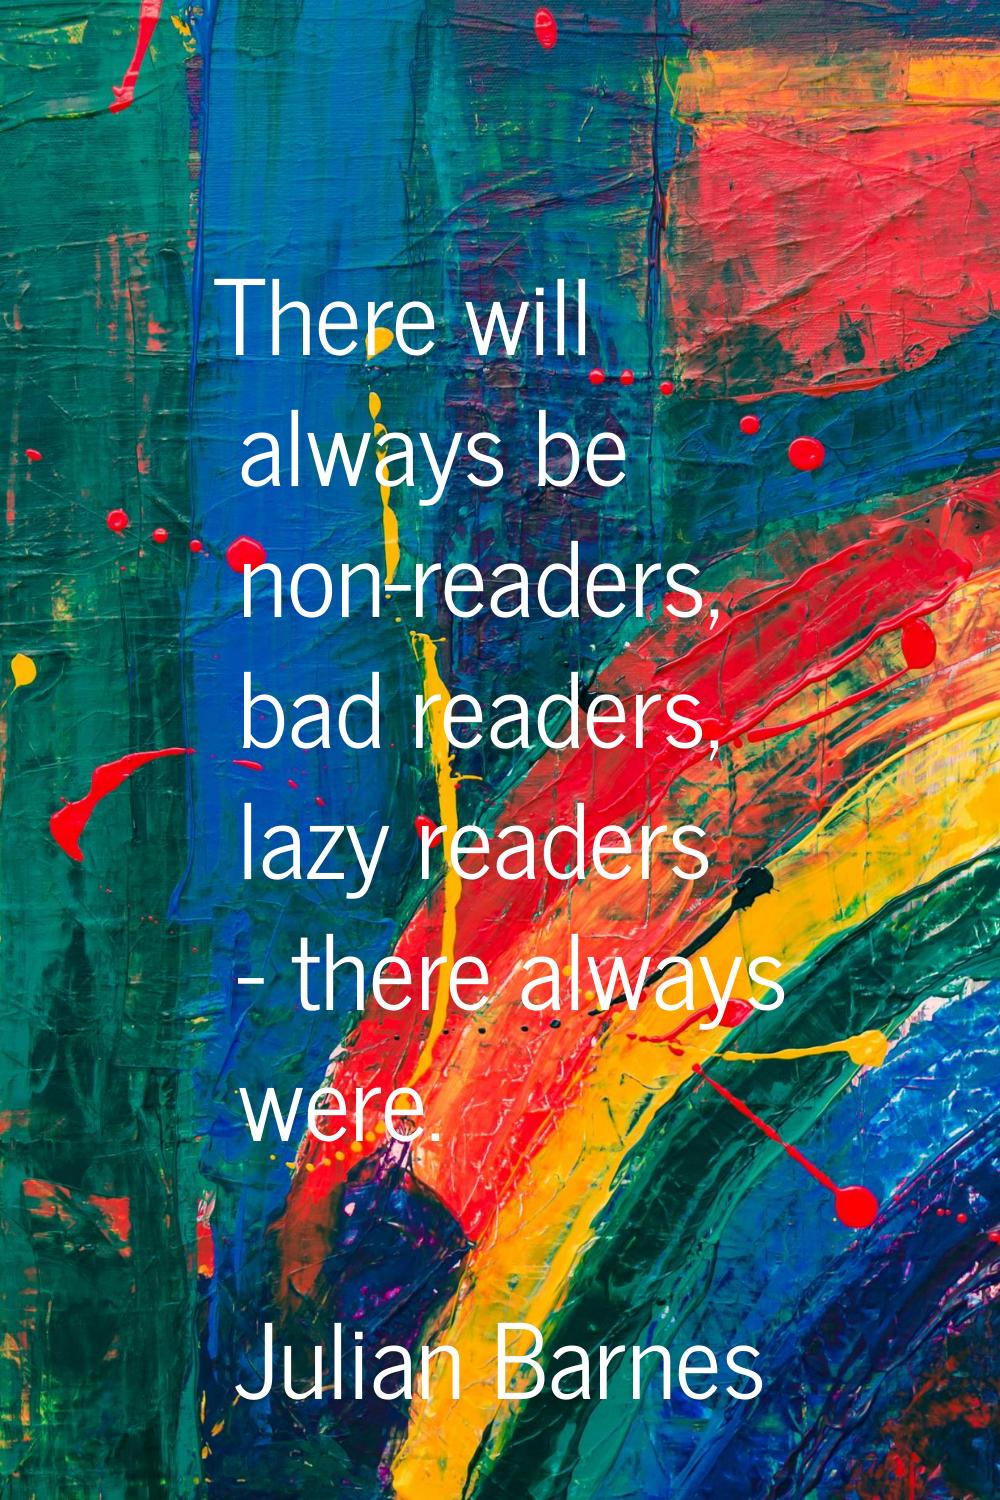 There will always be non-readers, bad readers, lazy readers - there always were.